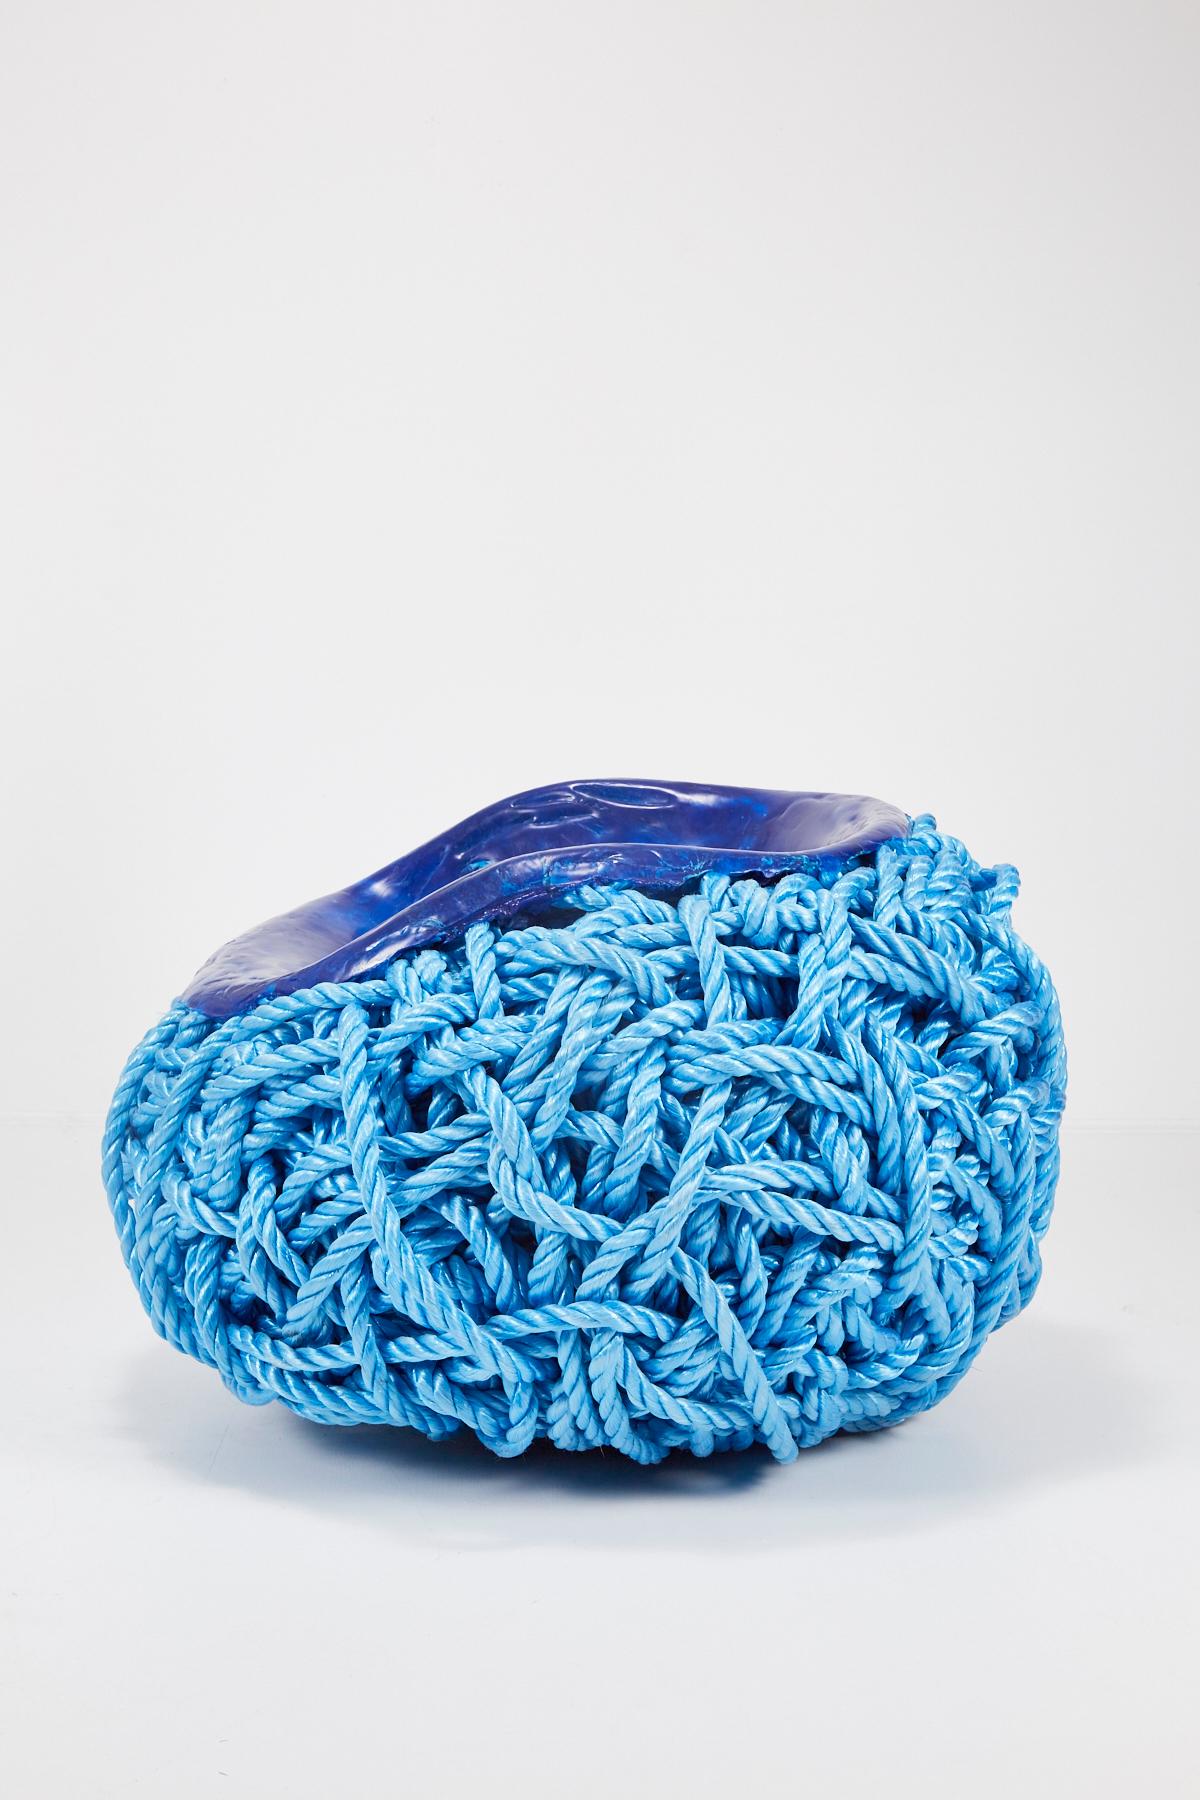 Meltdown Chair PP Rope Blue Chair by Tom Price, 2017 In Good Condition For Sale In Los Angeles, CA